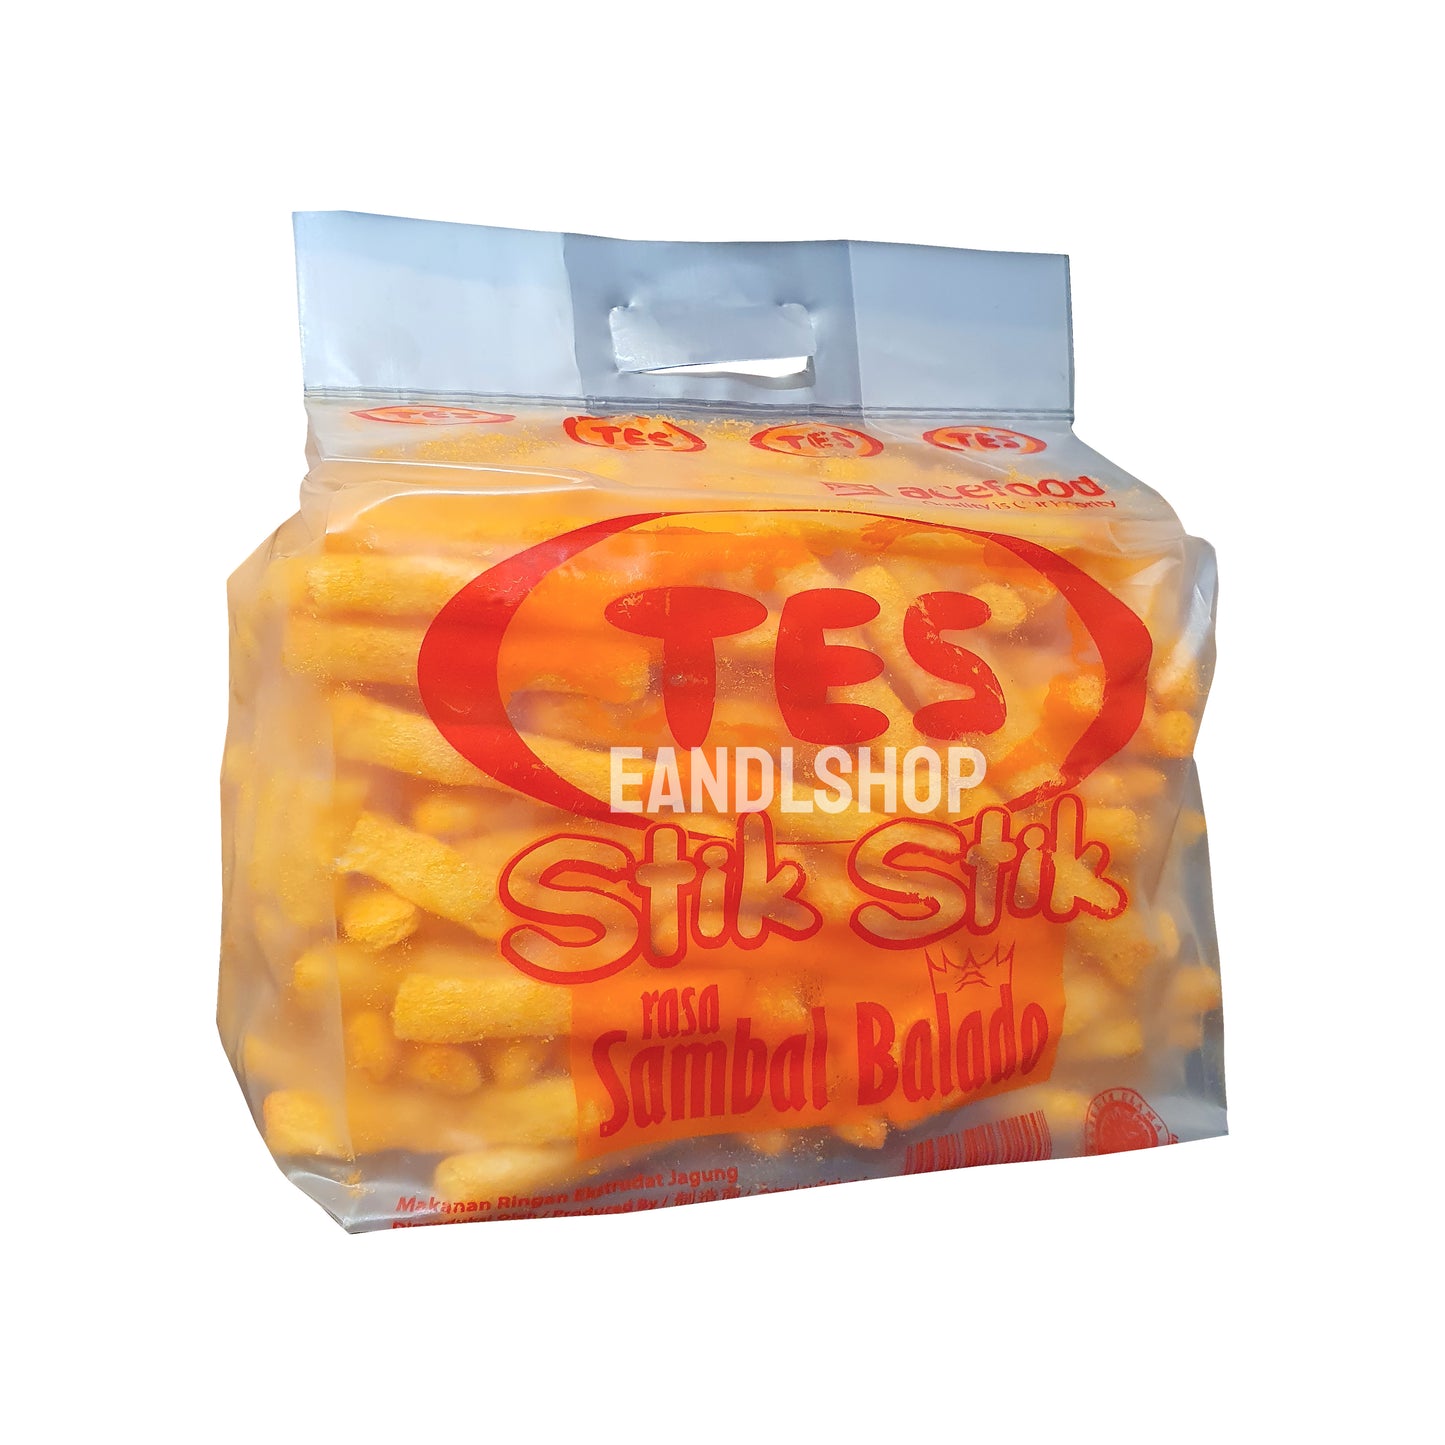 TES sambal balado stick 200g. Old-school biscuits, modern snacks (chips, crackers), cakes, gummies, plums, dried fruits, nuts, herbal tea – available at www.EANDLSHOP.com